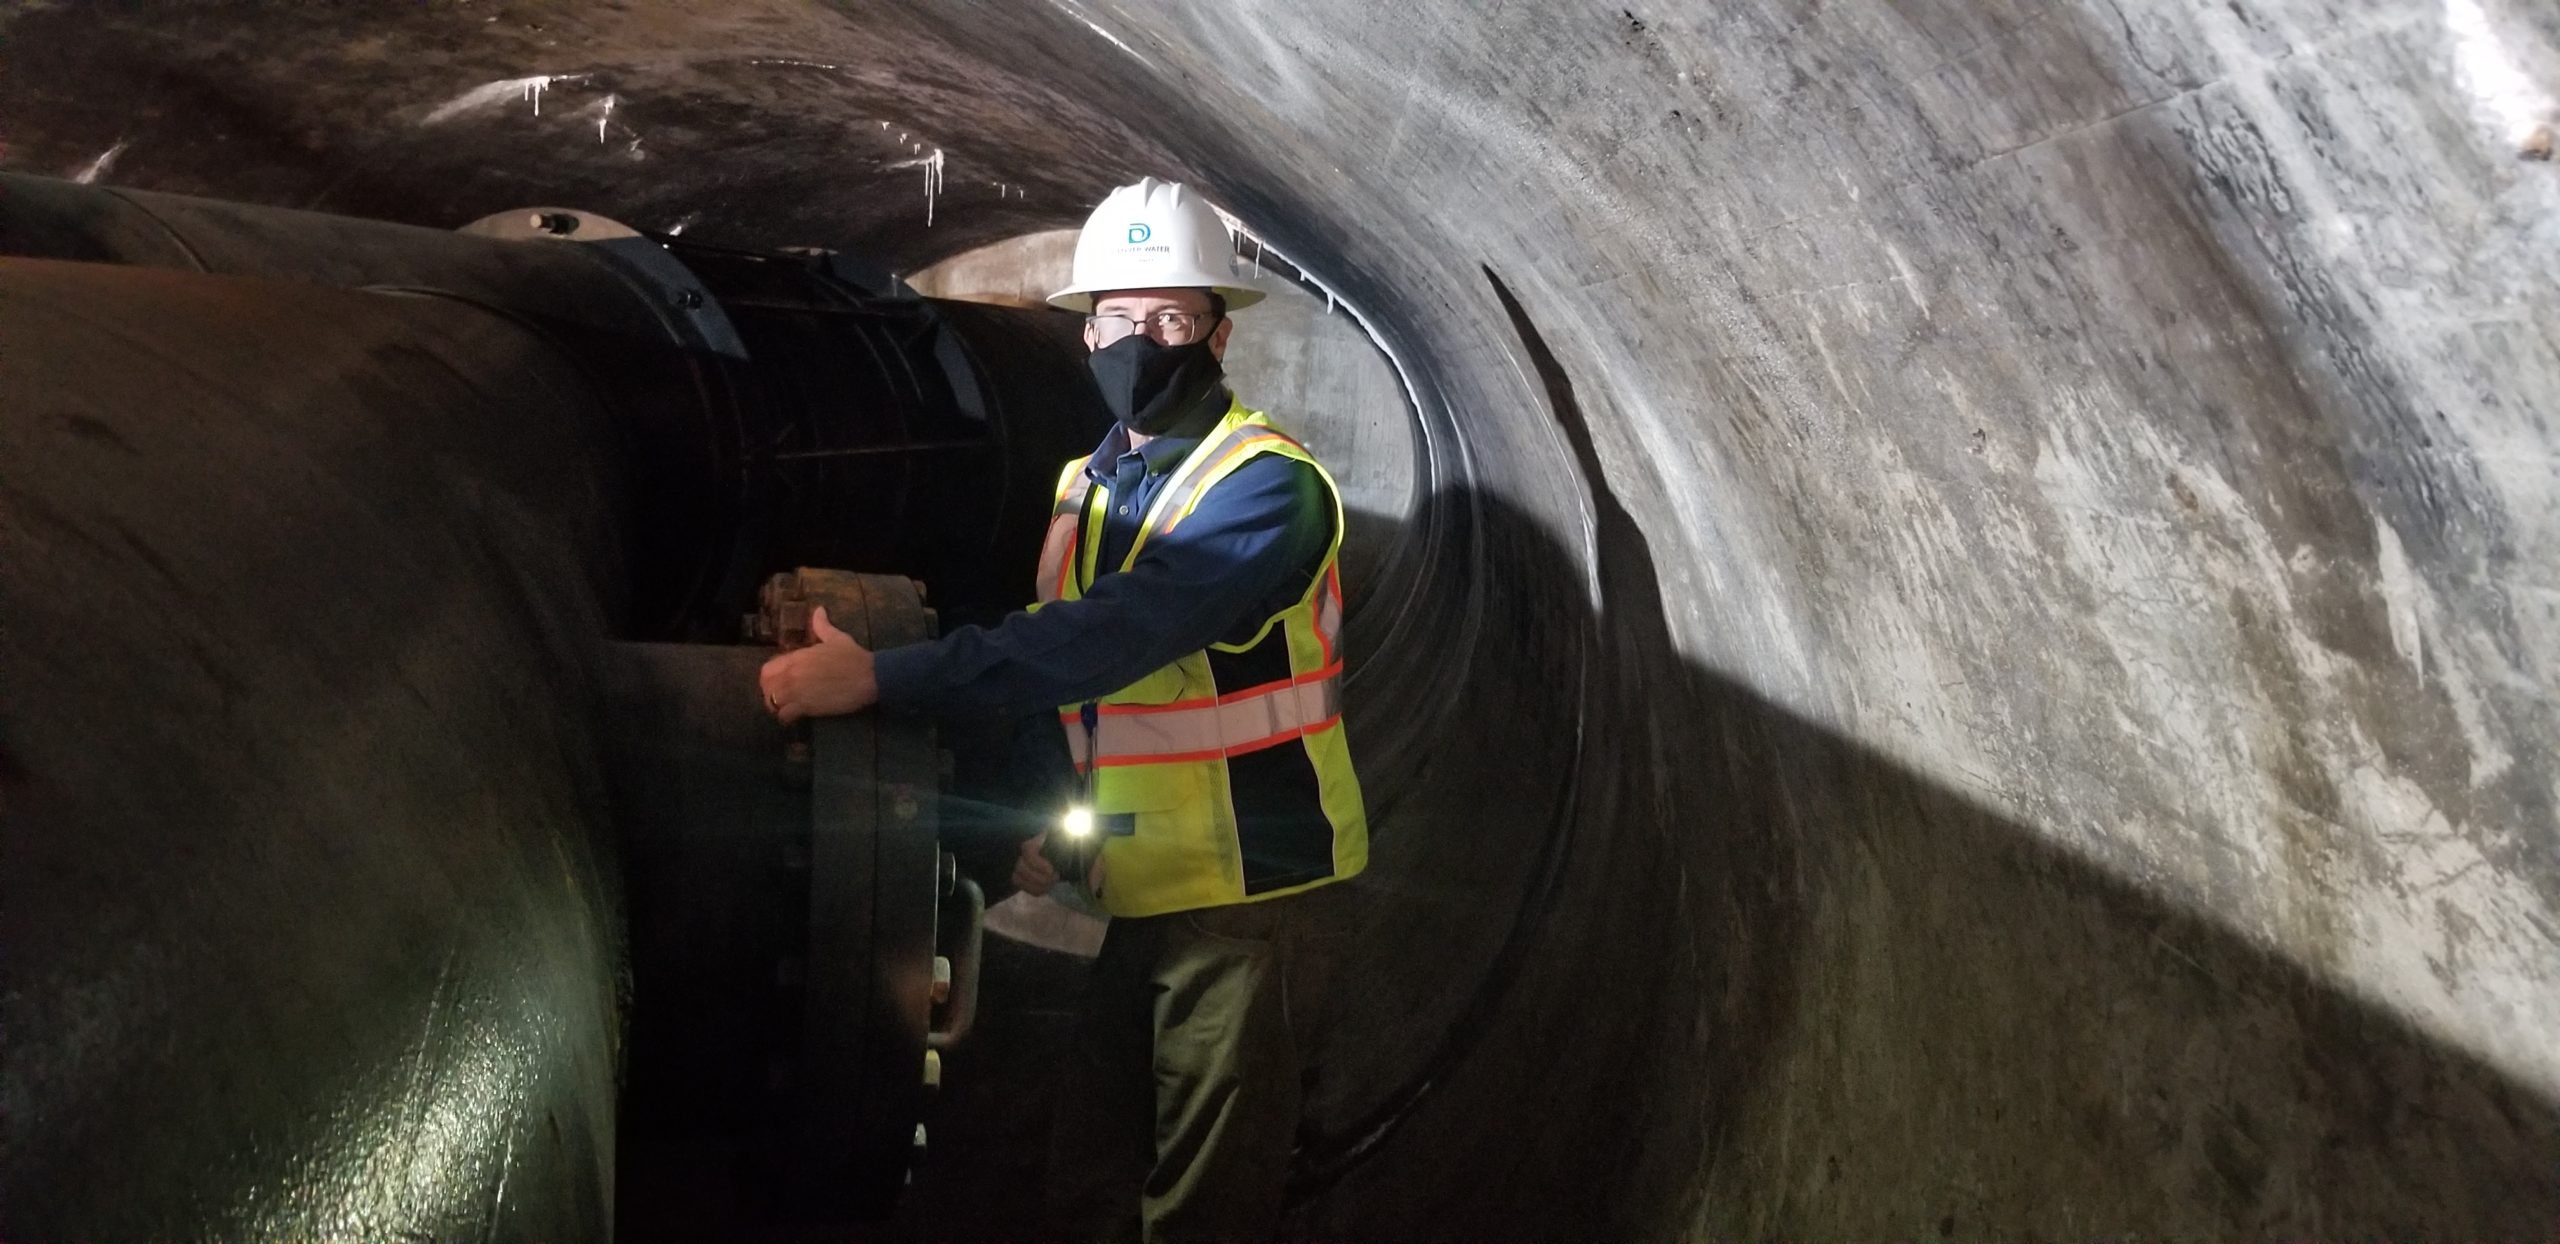 Crews will need to work in confined spaces like this to dismantle aging materials to make way for the new outlet works. Photo credit: Denver Water.